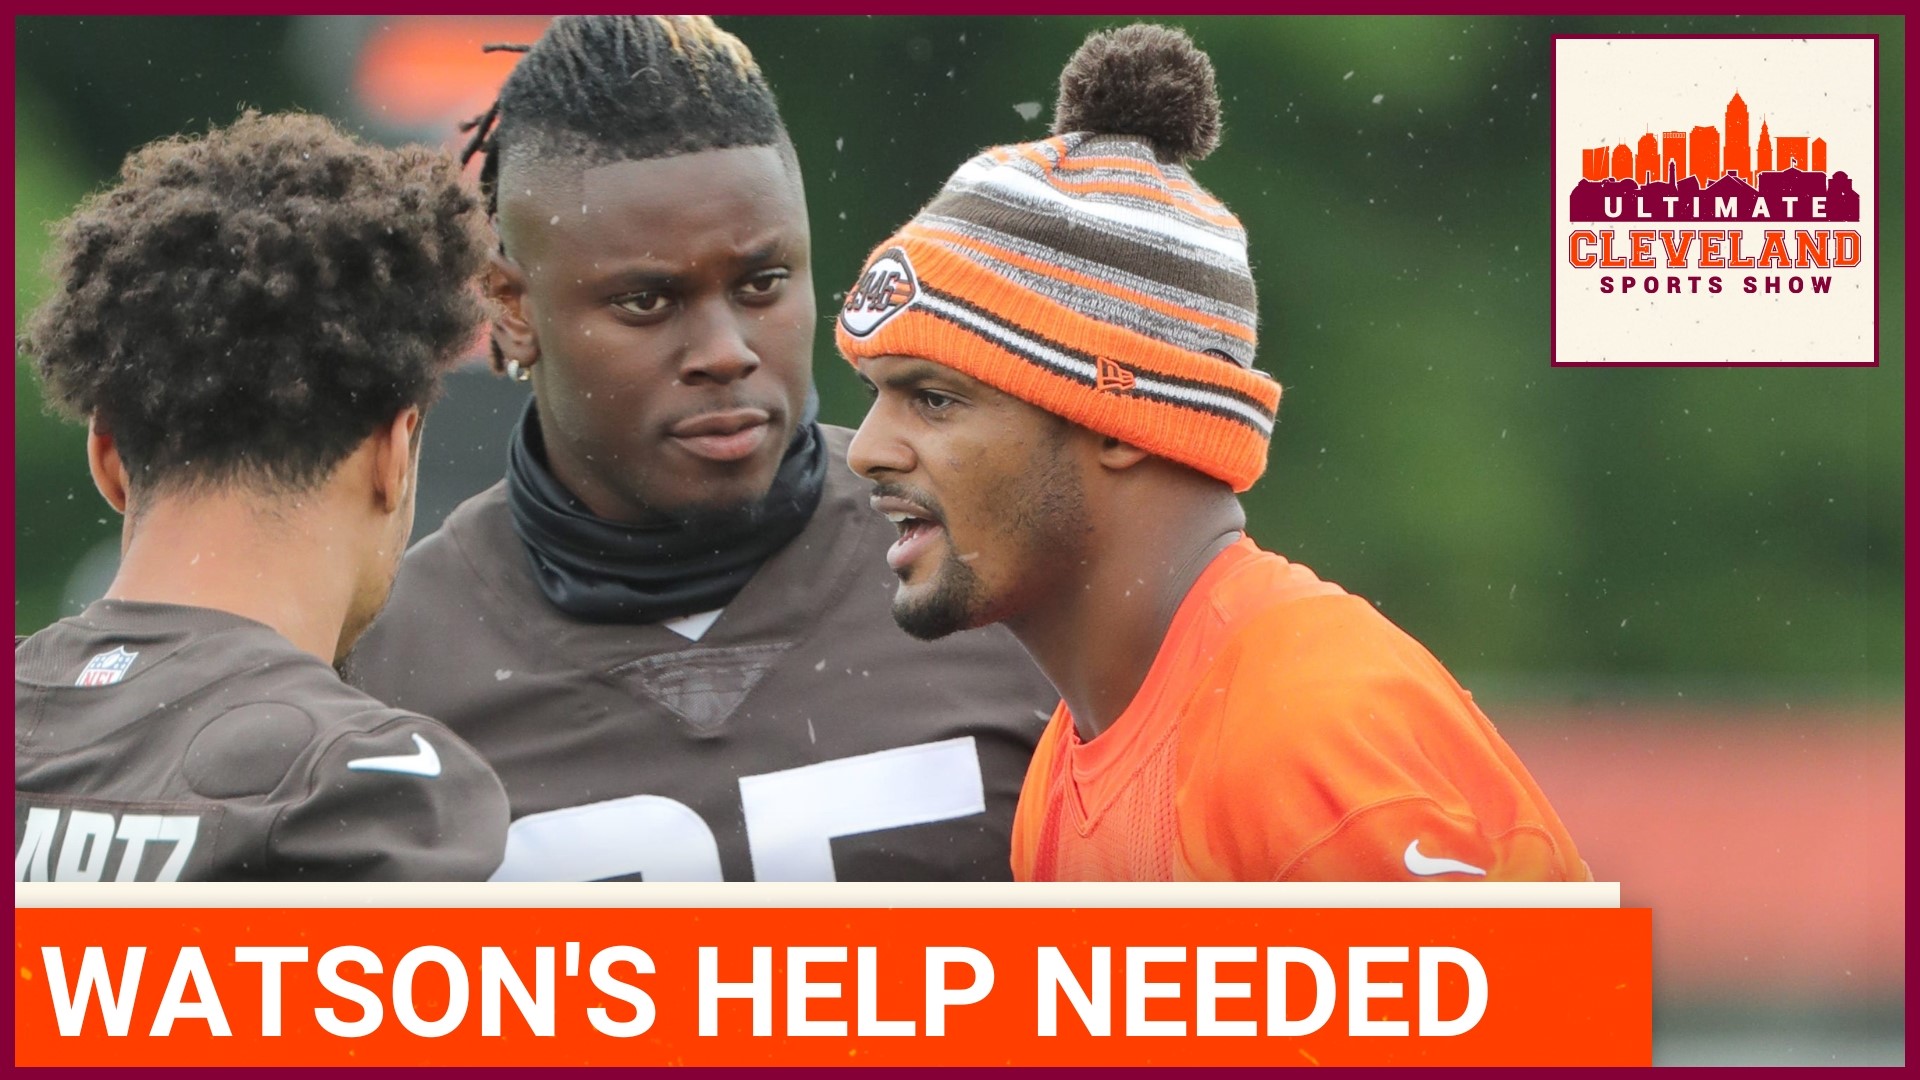 Deshaun Watson is still waiting to learn his potential suspension from the NFL as the rest of his Cleveland Browns teammates join him in Berea for training camp.